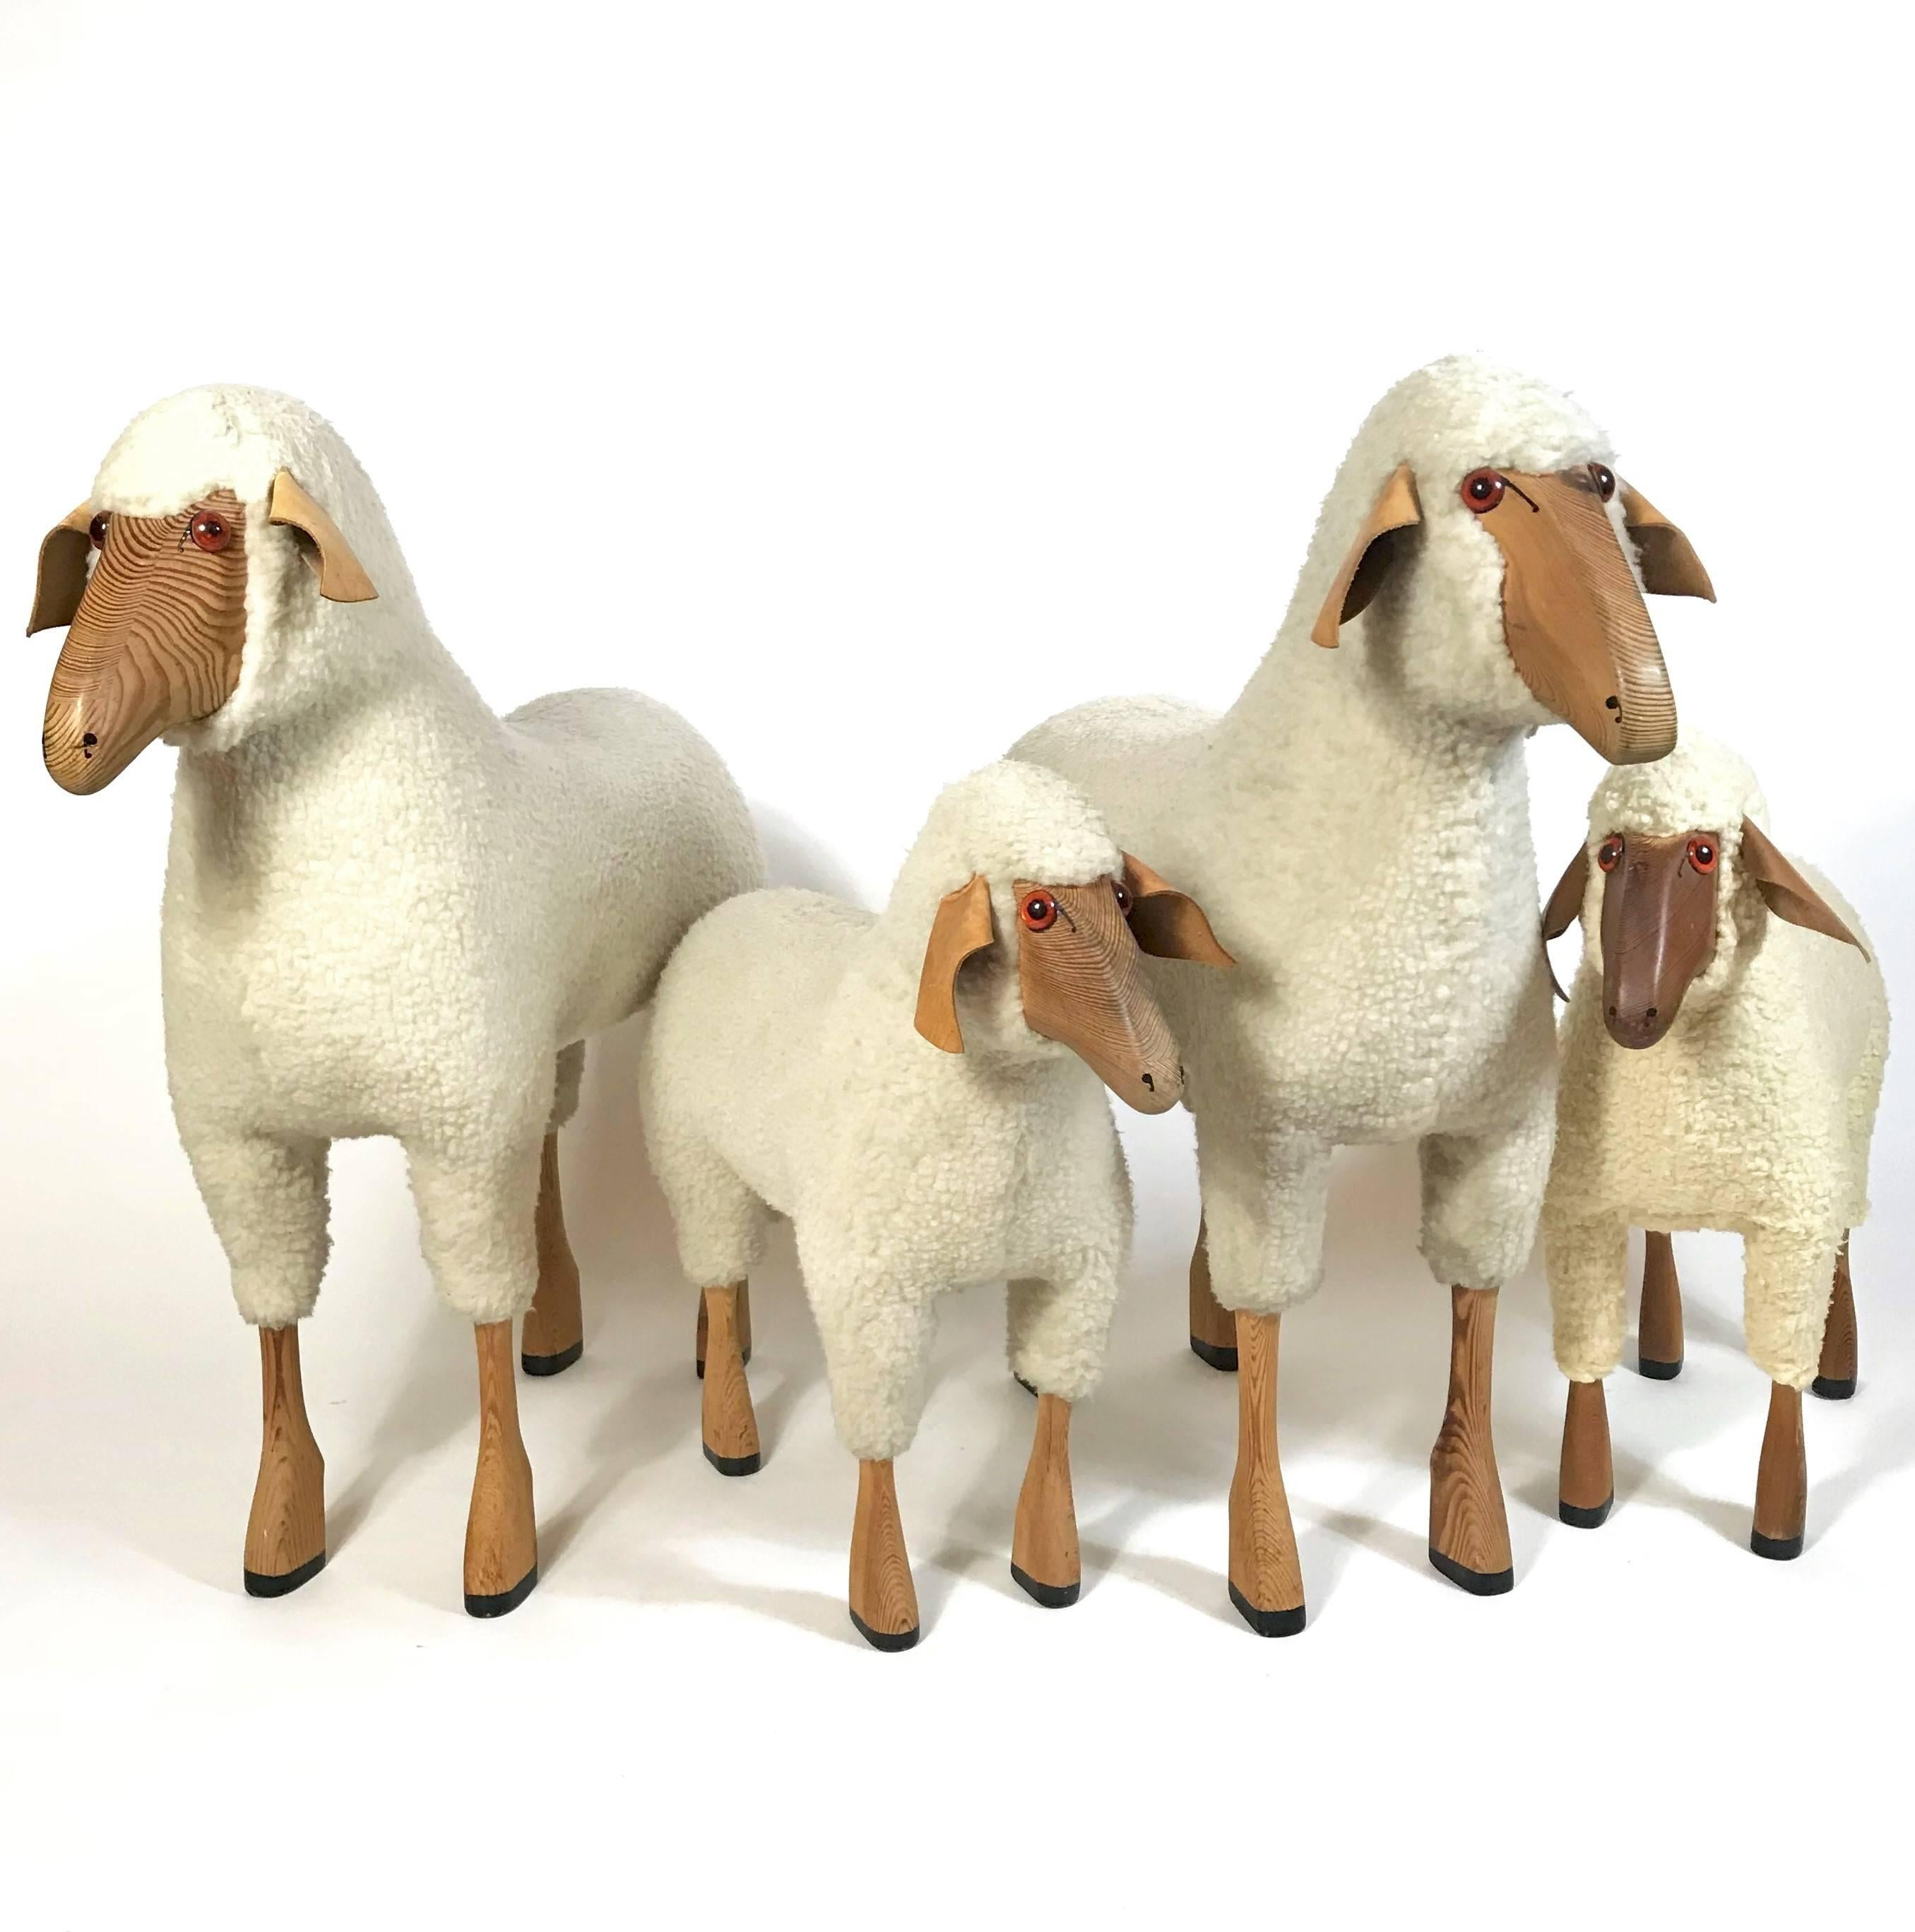 Very decorative handmade lambswool sheep stool object from early 1970s. The handmade wooden body is covered with beige/white lambswool fur. We have four sheep in stock, two big and two small ones - if you are looking for the bigger one, please visit